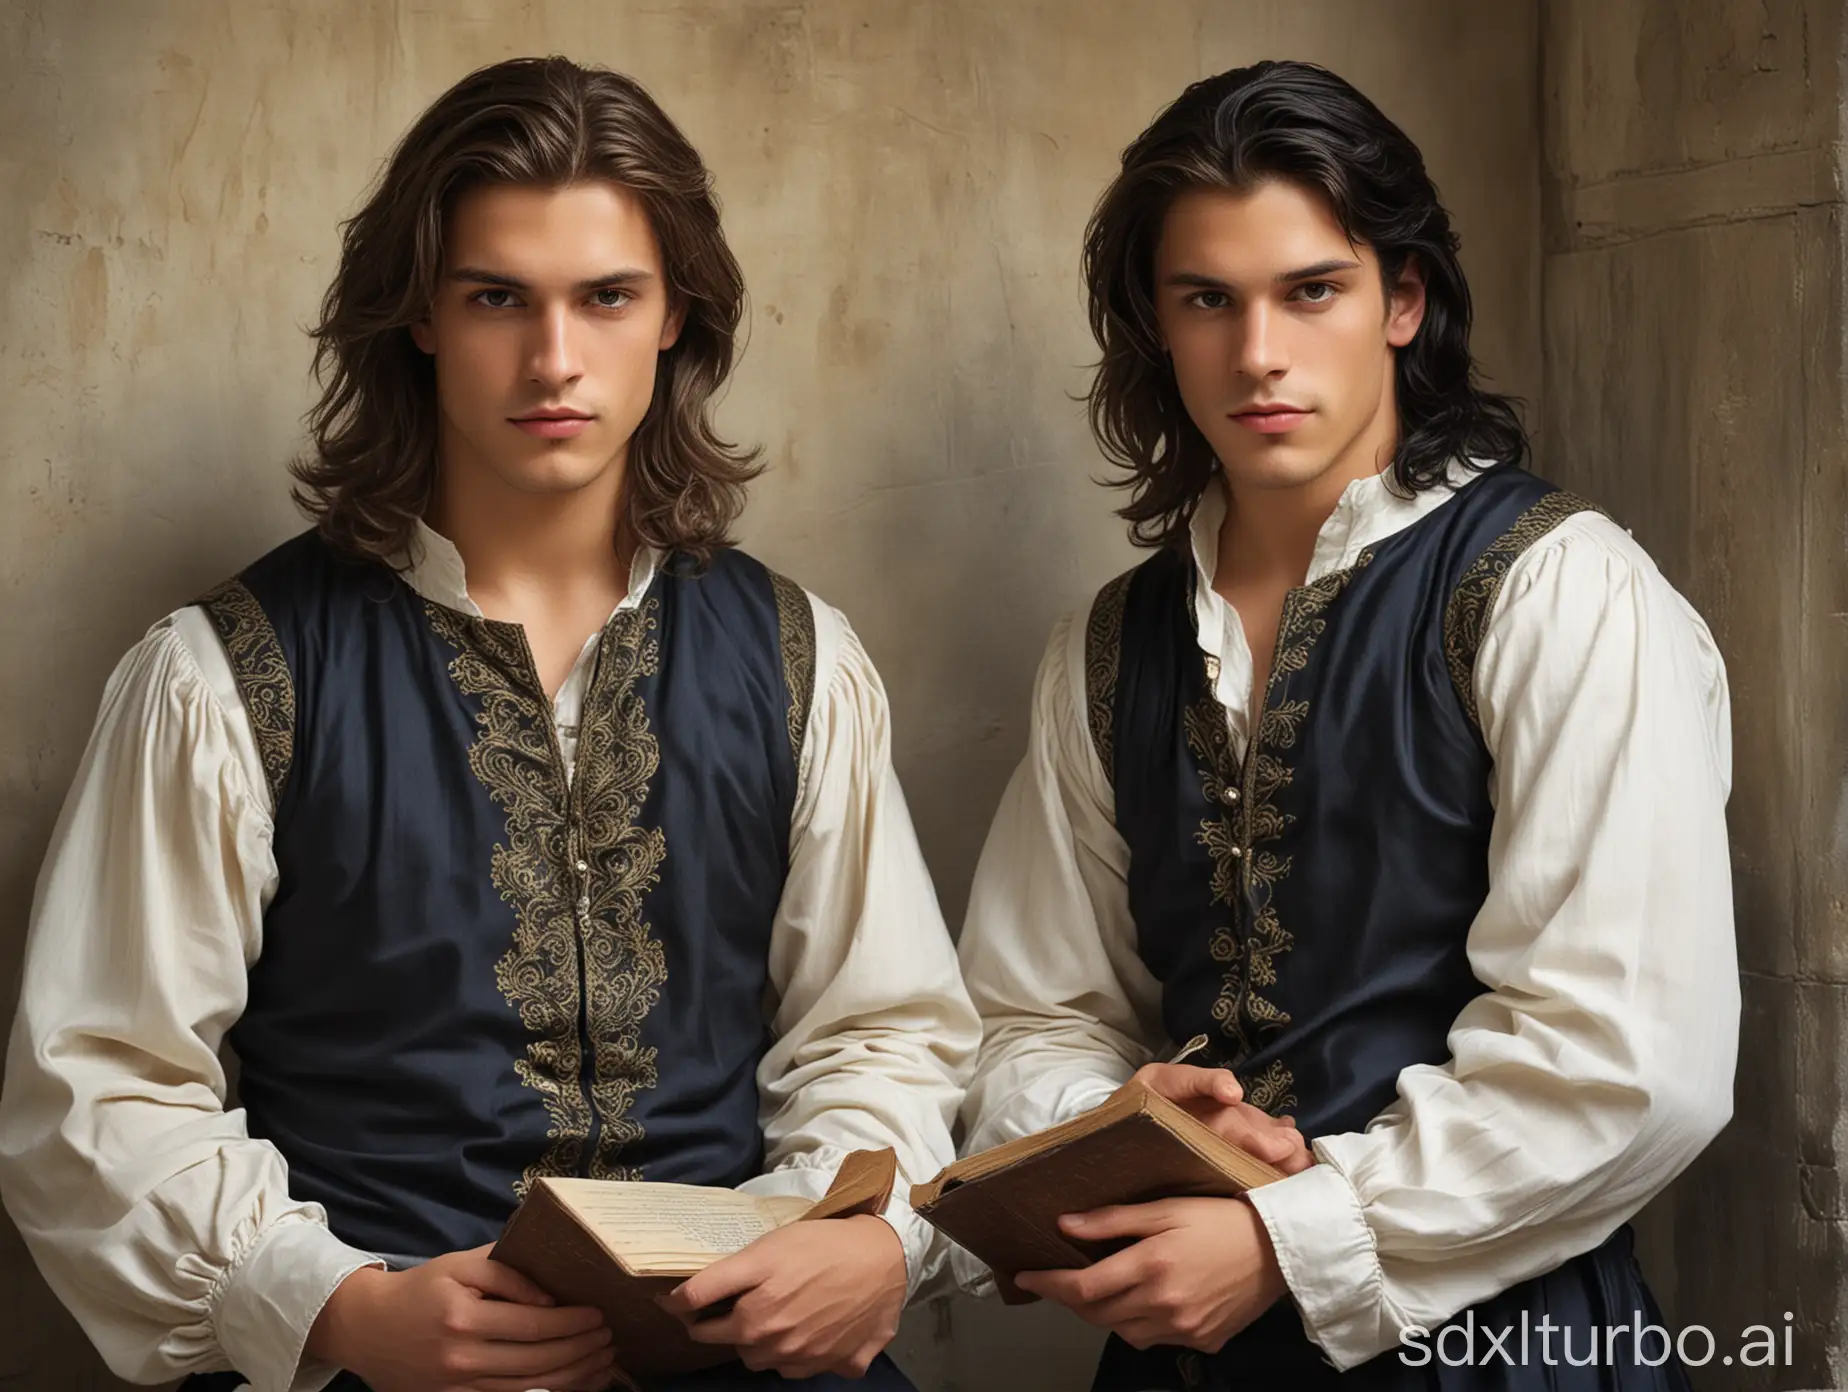 ((Medieval))), ((two guys)) in their twenties with shoulder length hair. One guy is handsome, ((dark-haired)) with gray eyes, wearing a medieval expensive black ornamented camisole. The other guy is ((light brown-haired)), thinner, wearing a medieval expensive white shirt and a dark blue vest, holding an ancient book. They sit side by side and discuss the book.